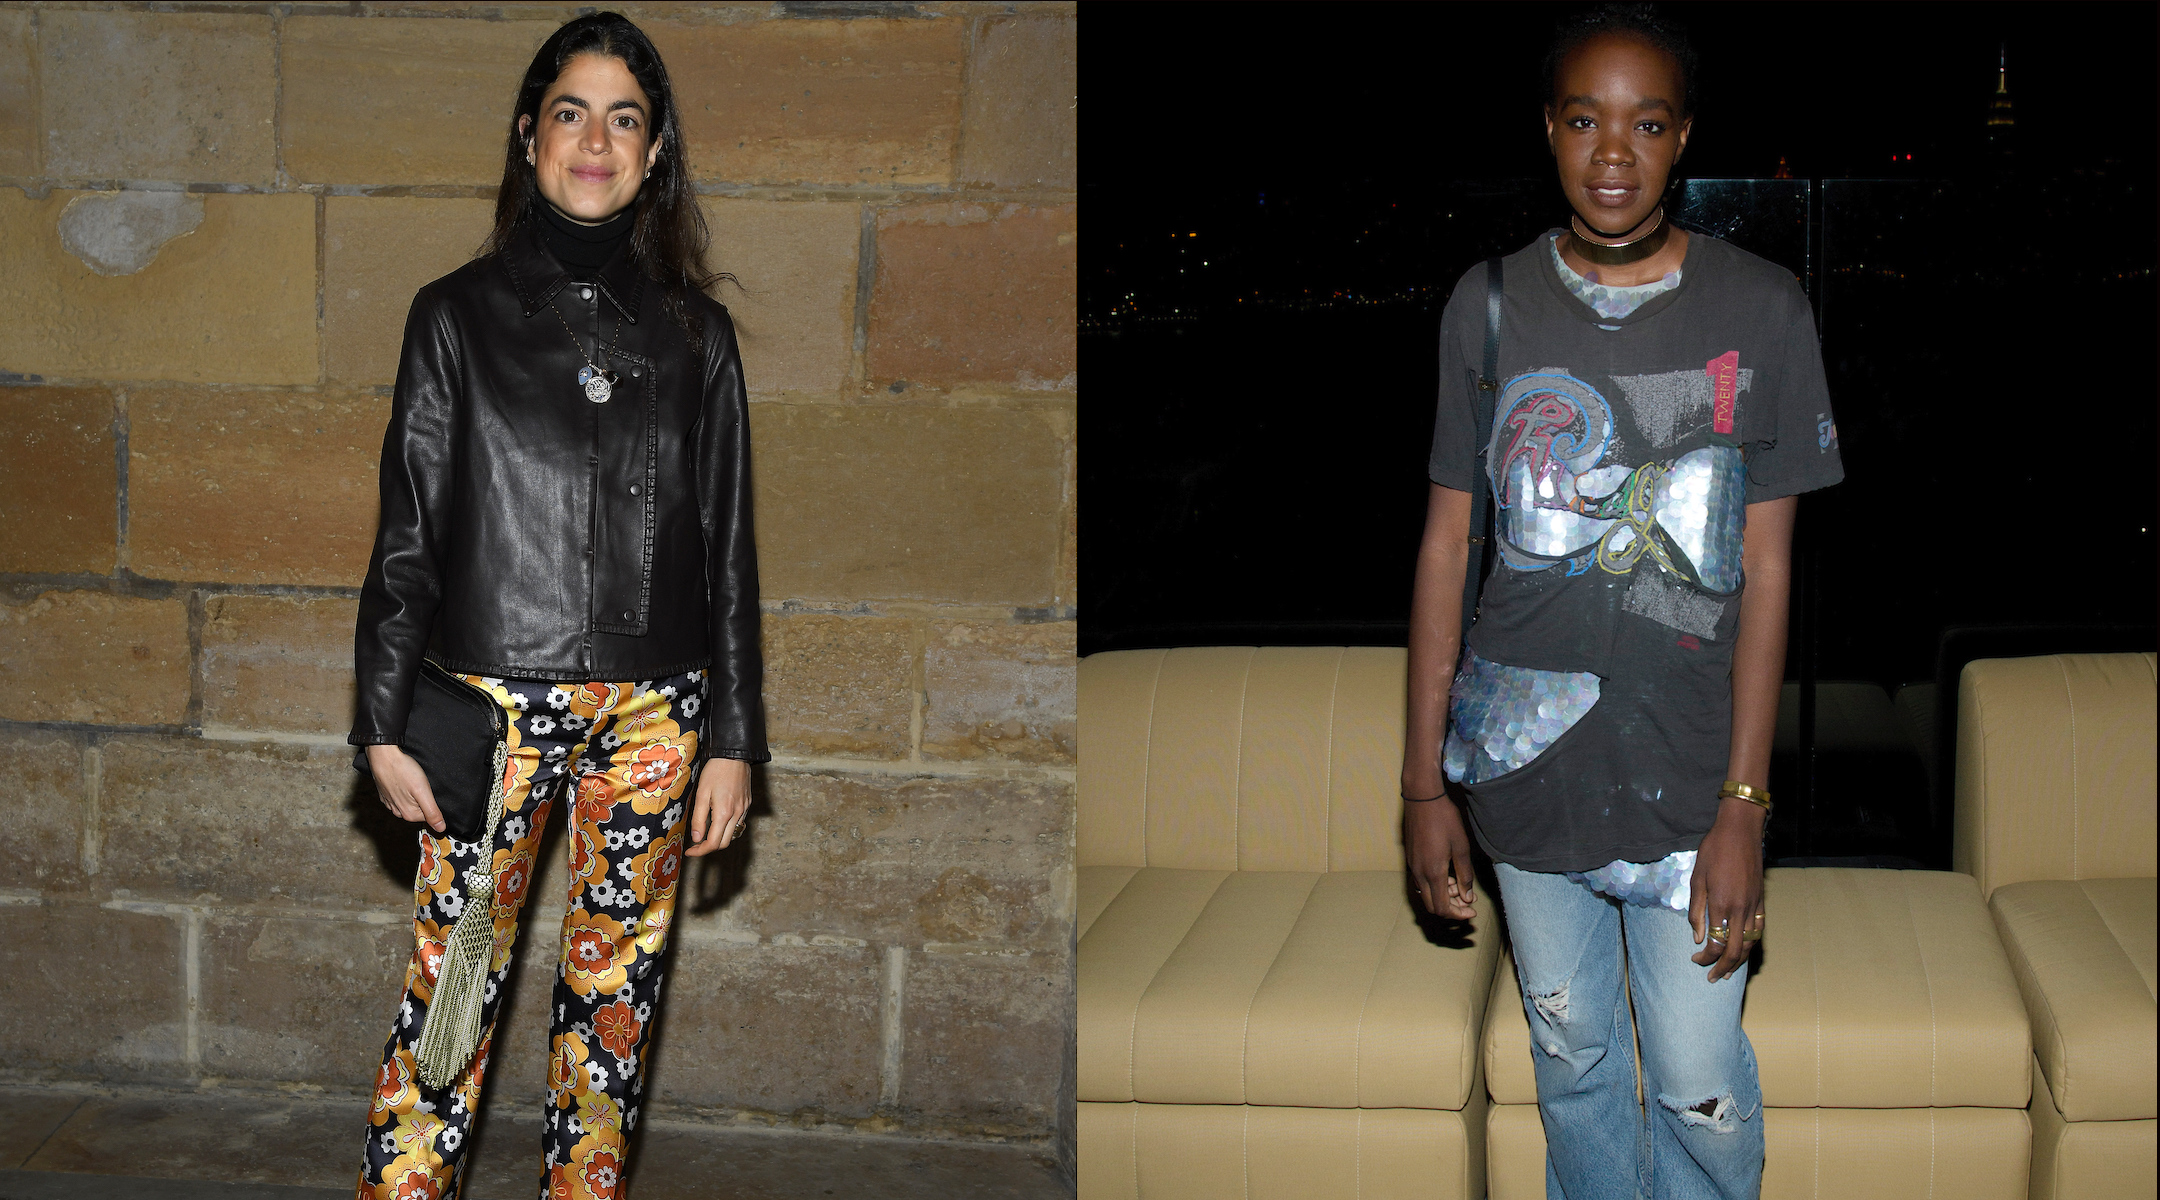 Recho Omondi (right, pictured in 2016) is being accused of antisemitism for calling Leandra Medine Cohen (left, pictured in 2020) a "Jewish American Princess." (Getty Images)